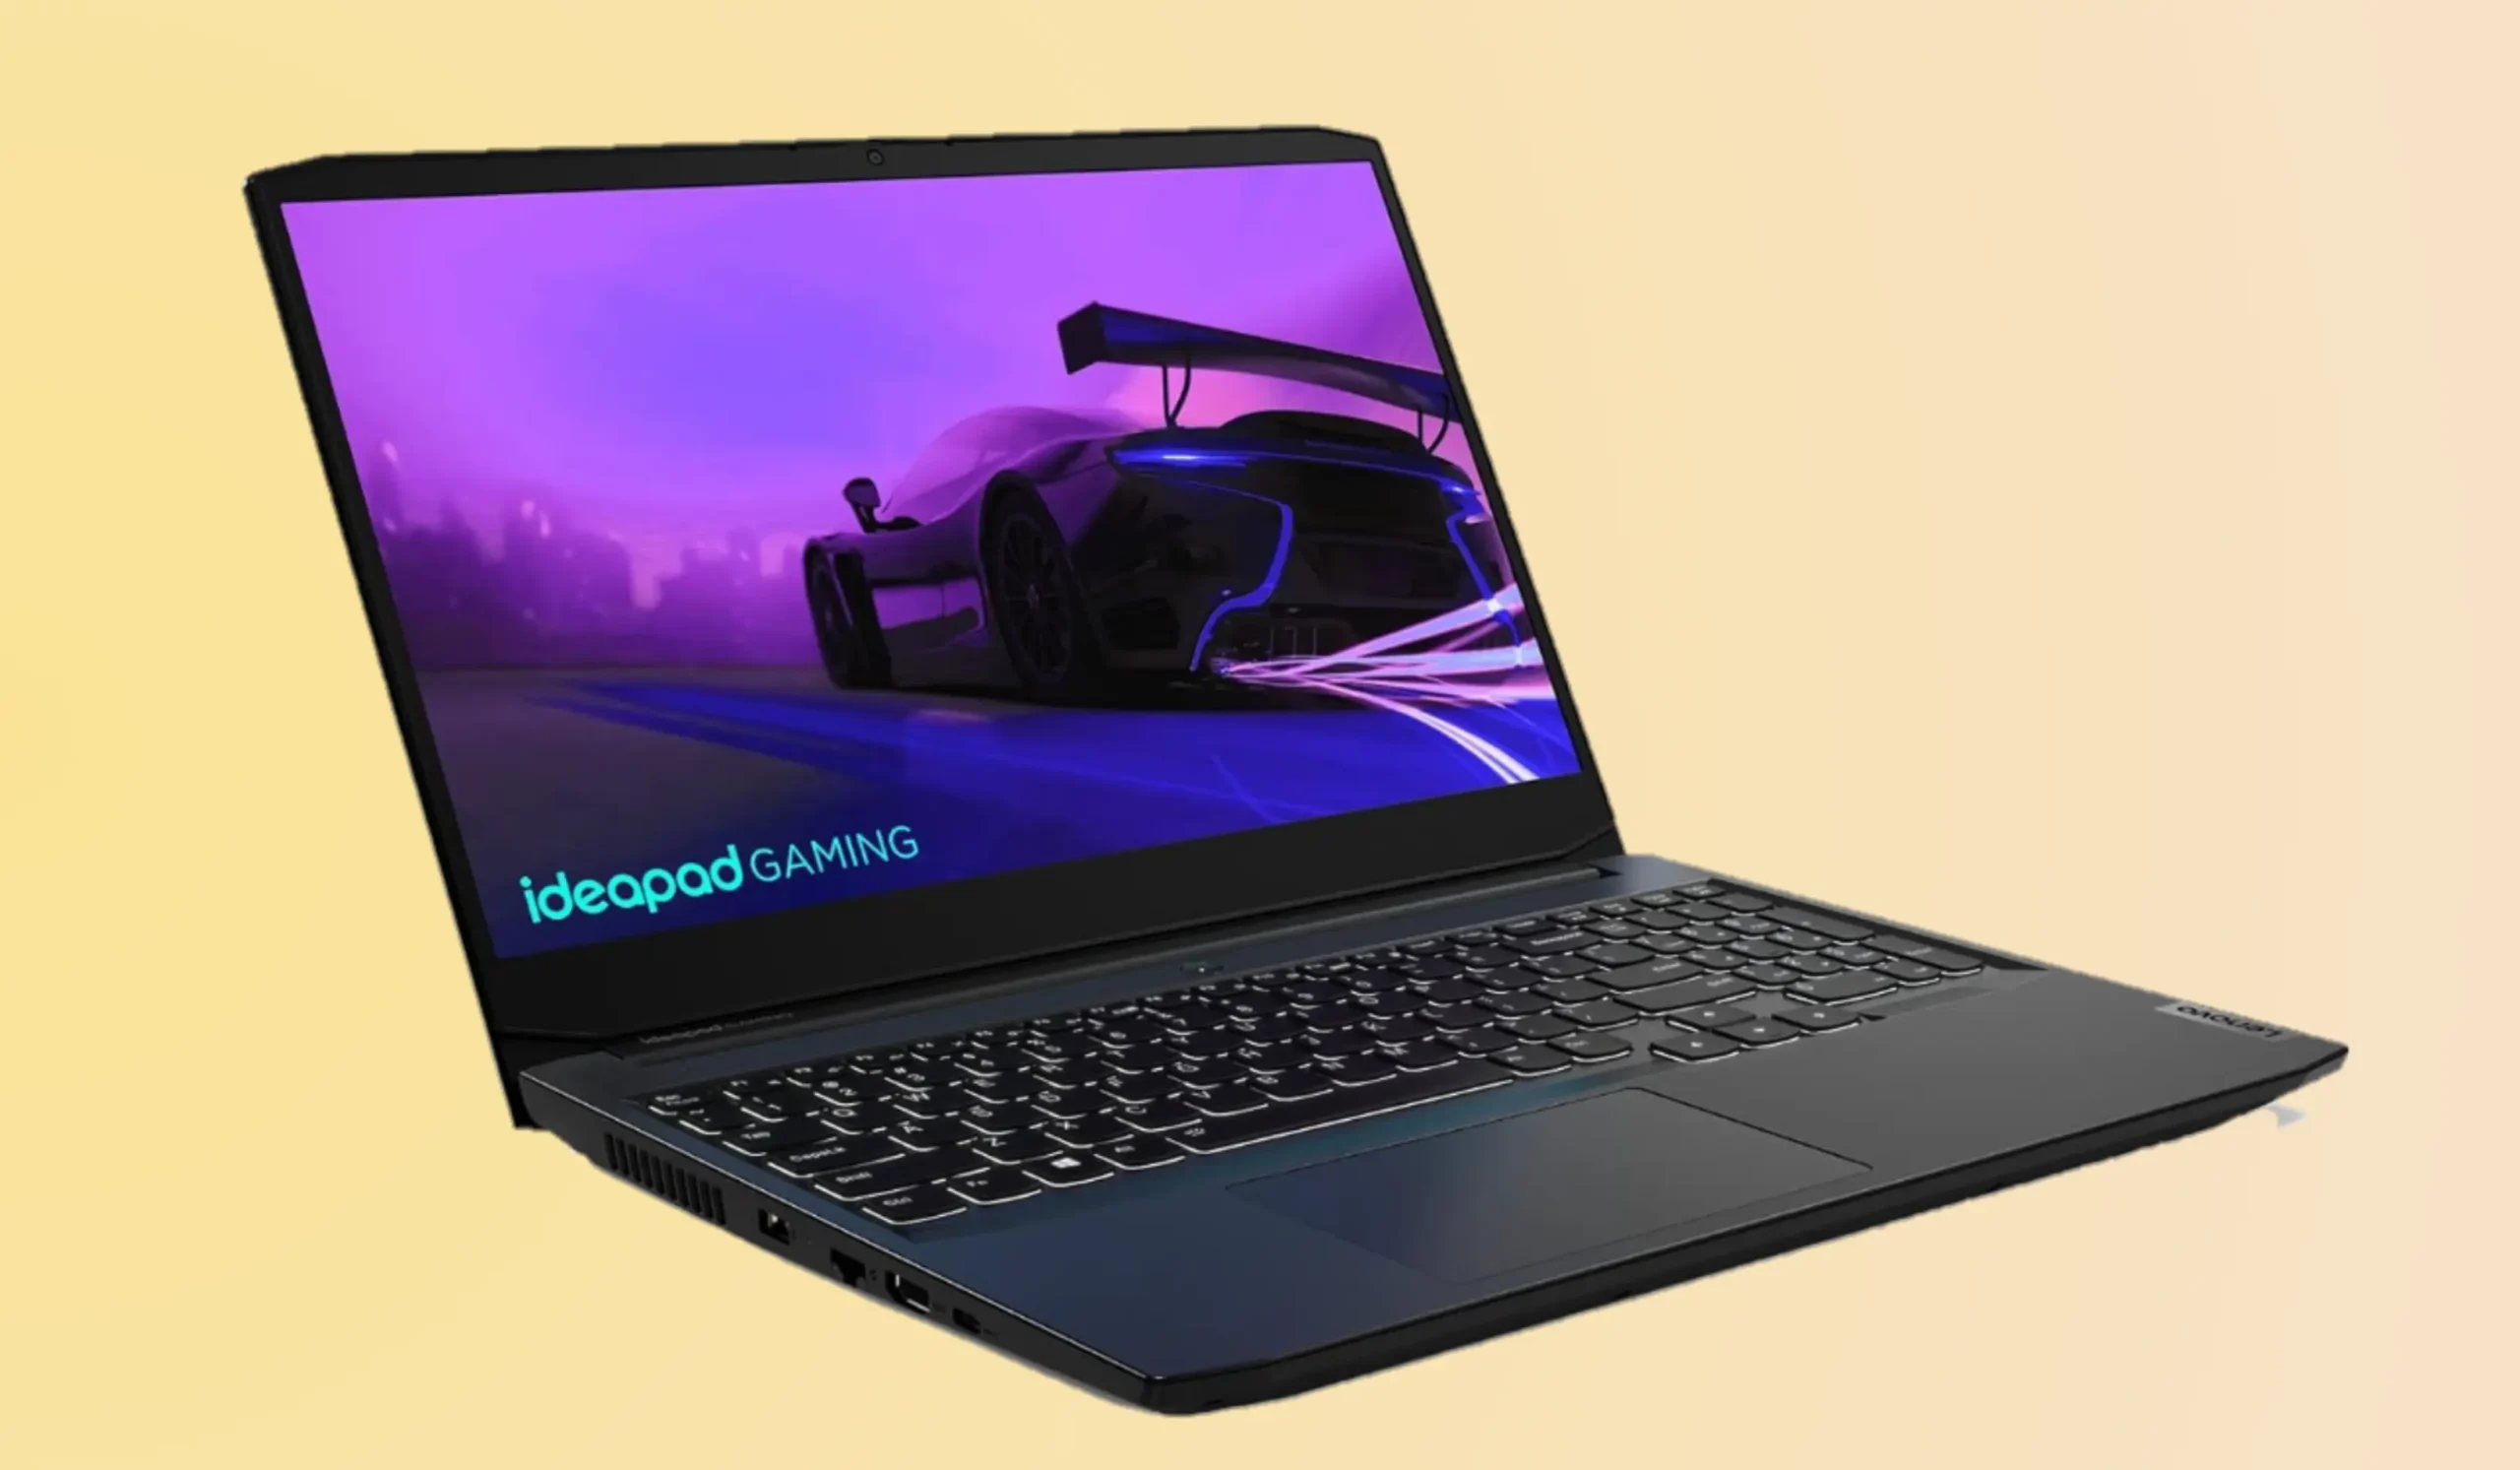 is Lenovo Ideapad gaming 3 good for gaming?